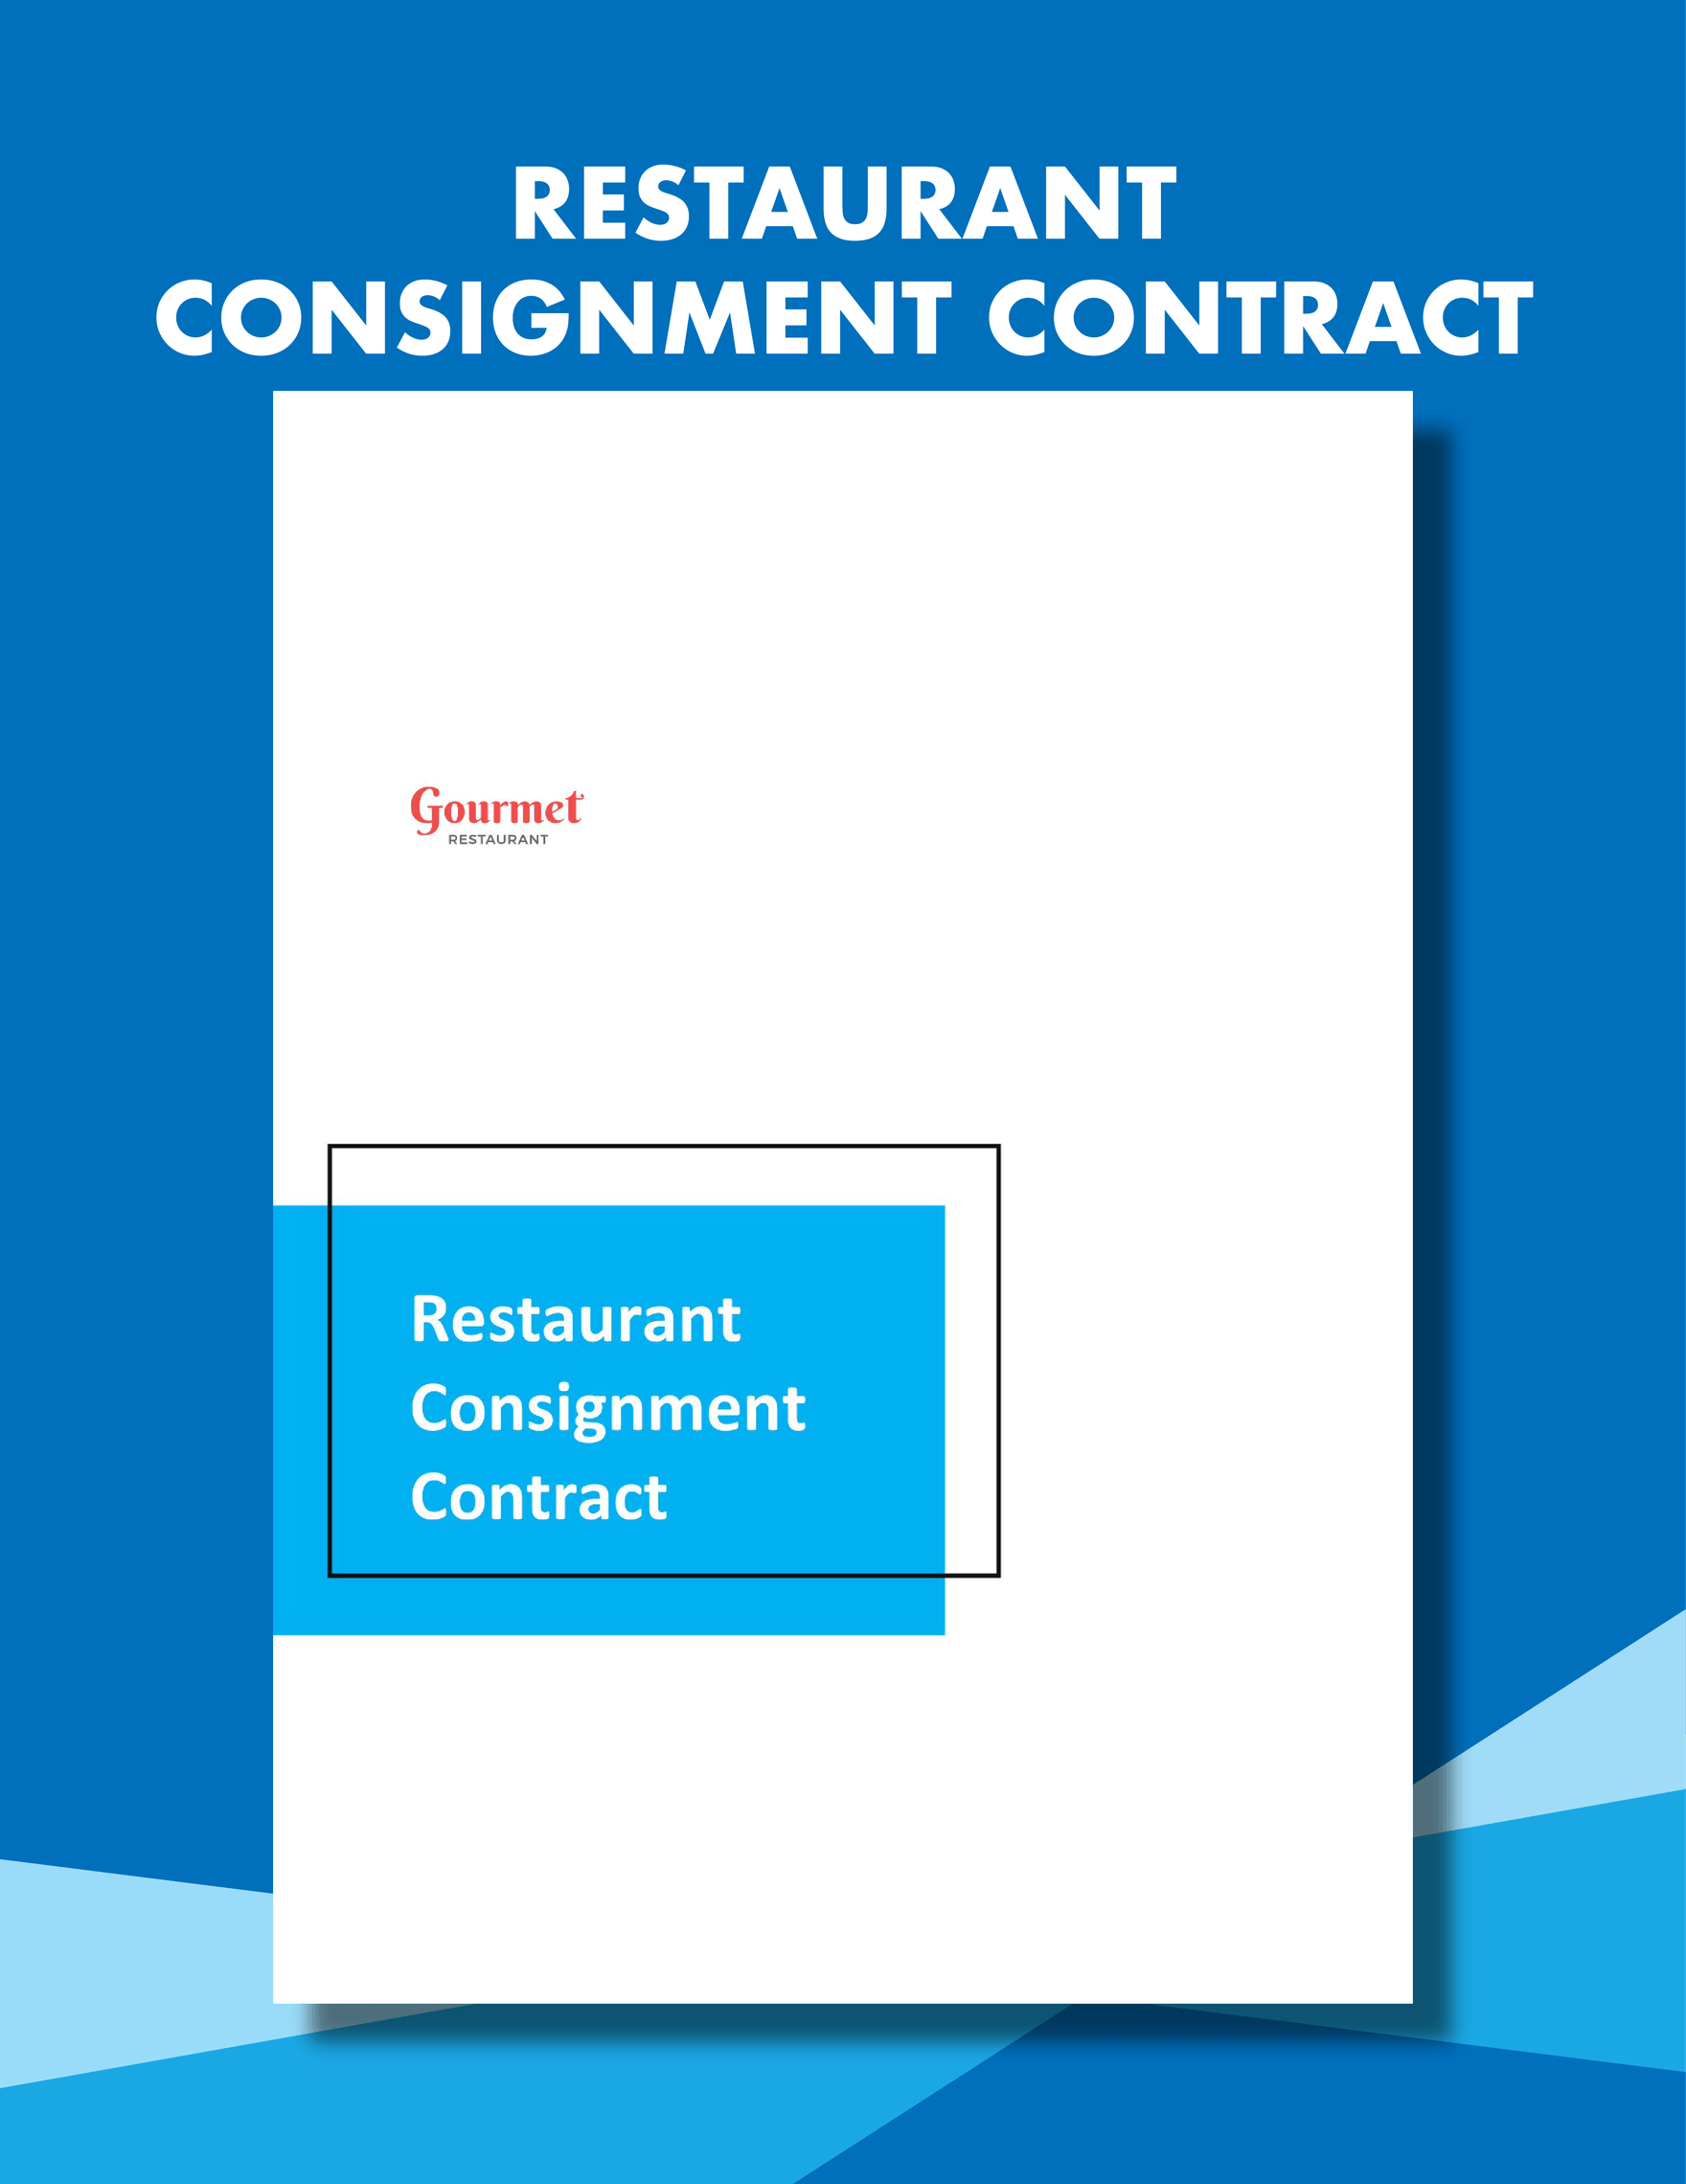 Restaurant Consignment Contract Template